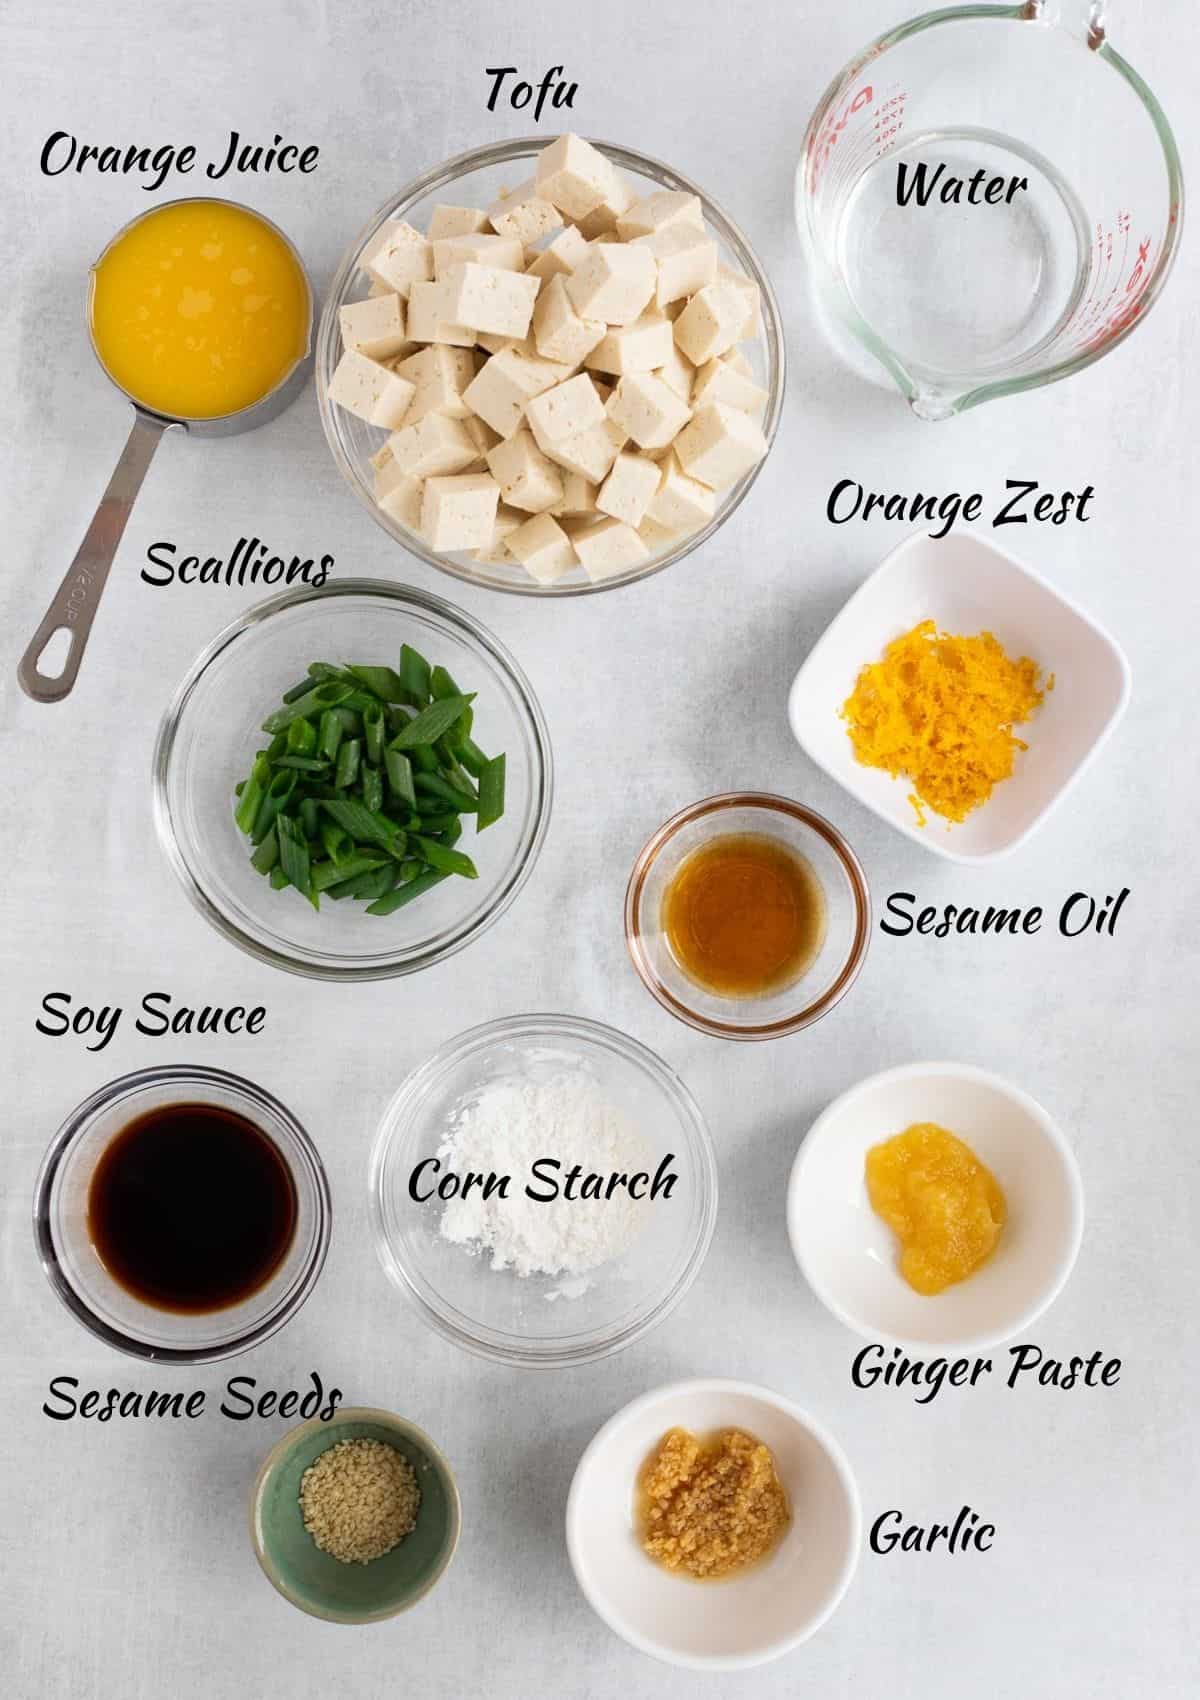 Orange juice in measuring cup, cubed tofu in glass bowl, water in measuring  cup, orange zest in small square bowl, chopped scallions in bowl, sesame oil in bowl, soy sauce in bowl, corn starch in bowl, ginger paste in bowl, sesame seeds in bowl, minced garlic in bowl. 